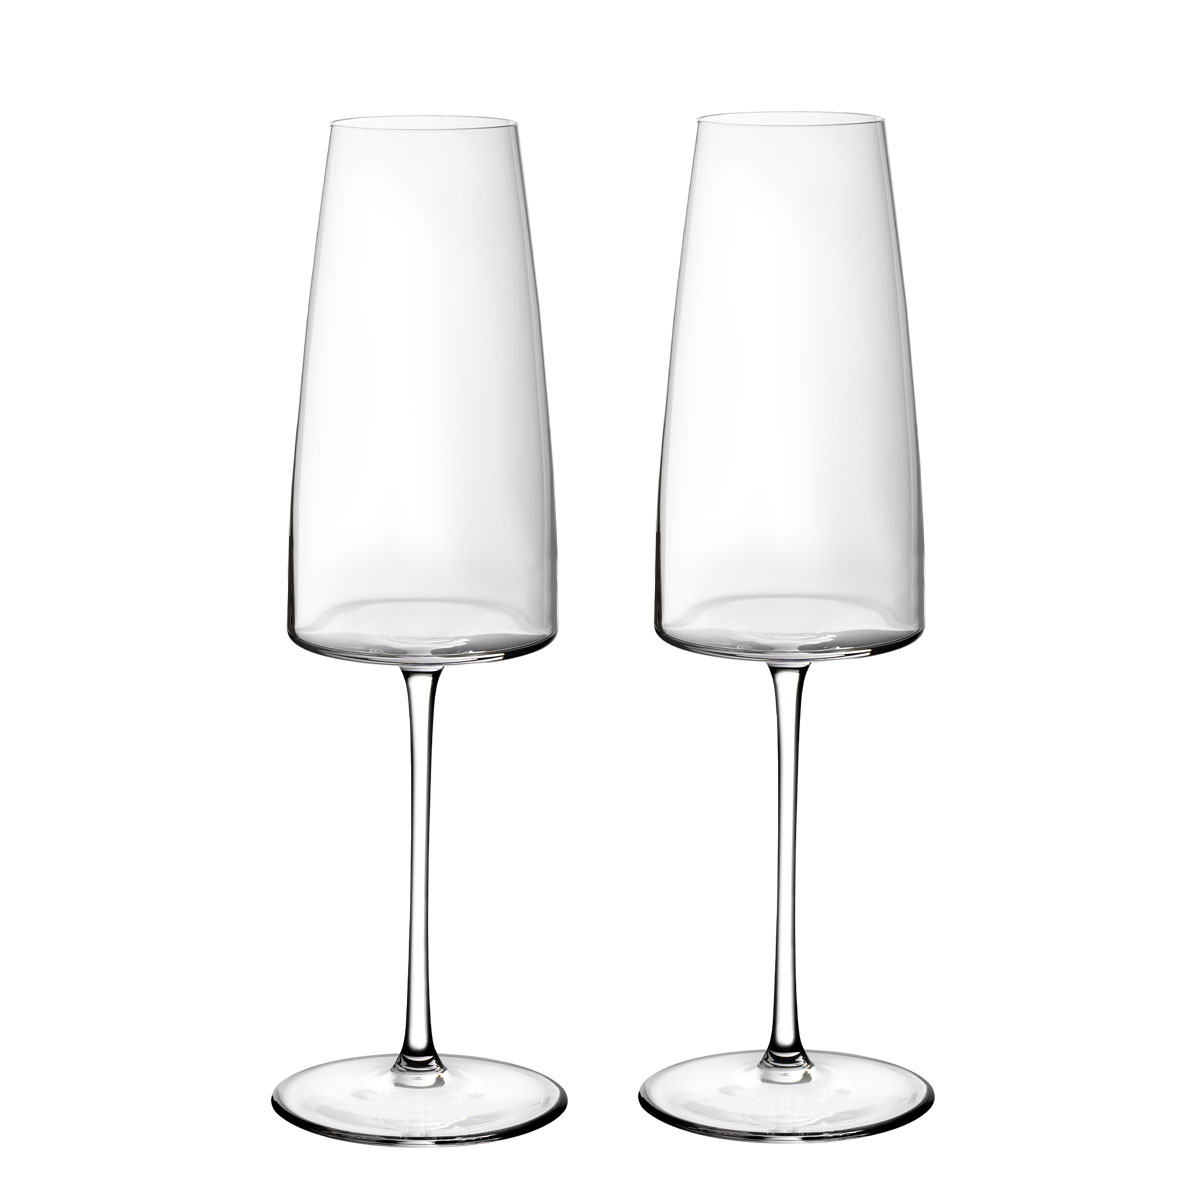 Villeroy and Boch MetroChic Champagne Flute Glasses, Pair